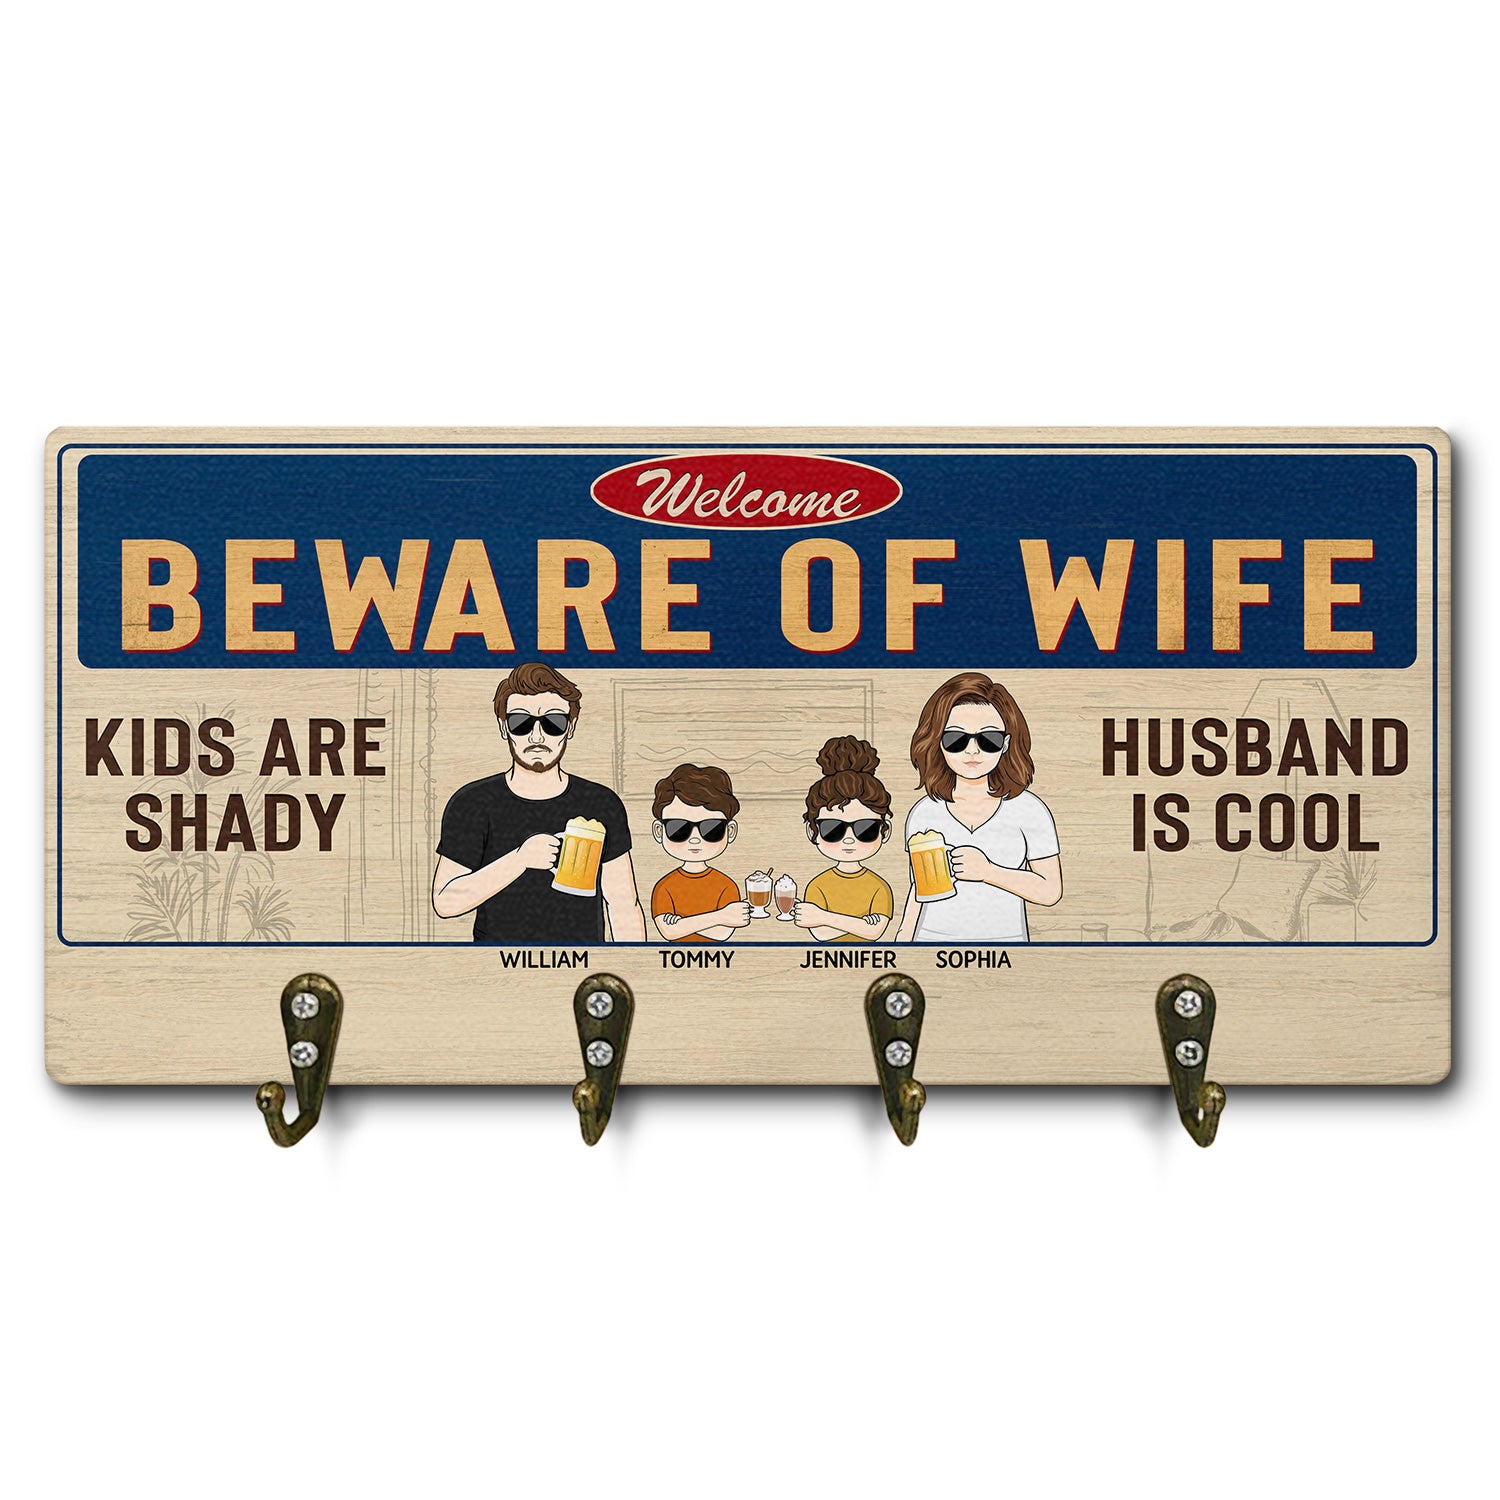 Beware Of Wife Kids Are Shady Husband Is Cool Couple - Home Decor, Funny, Anniversary Gift For Family - Personalized Custom Wood Key Holder